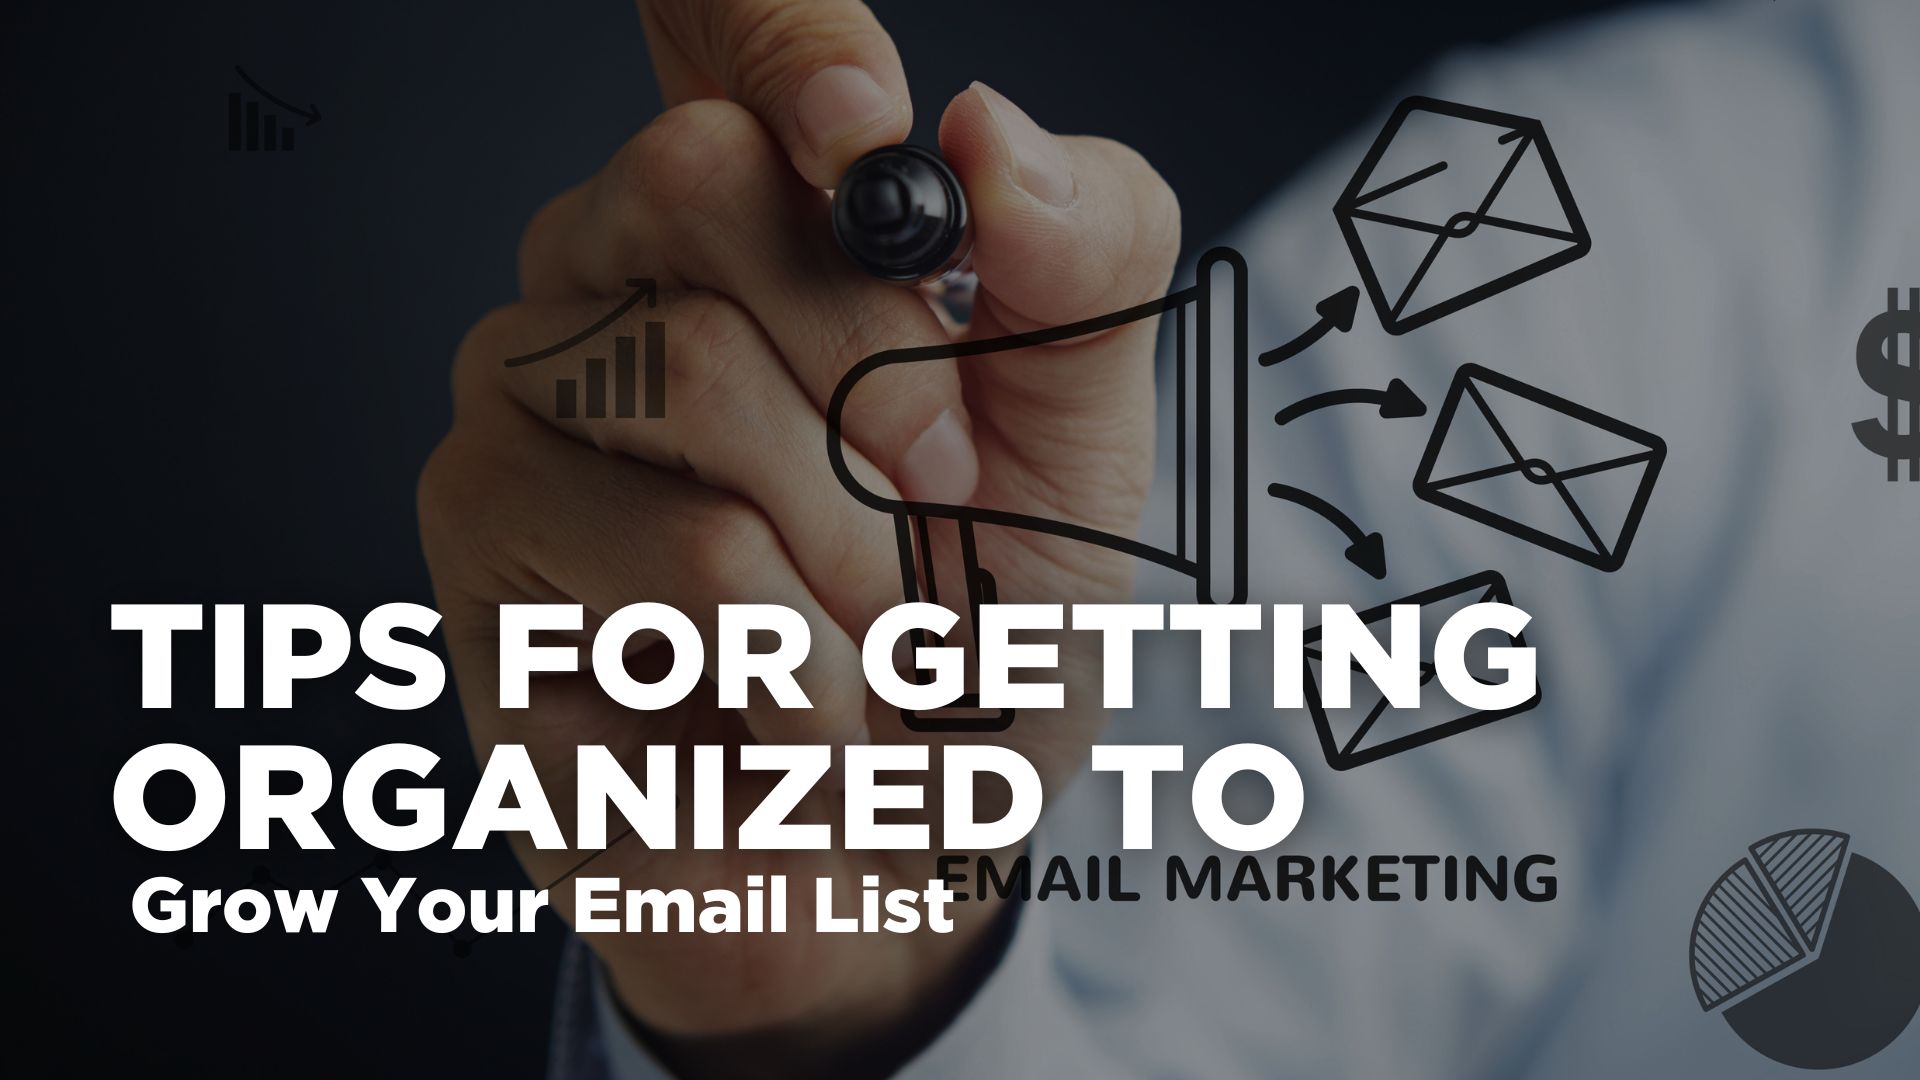 Tips for Getting Organized to Grow Your Email List